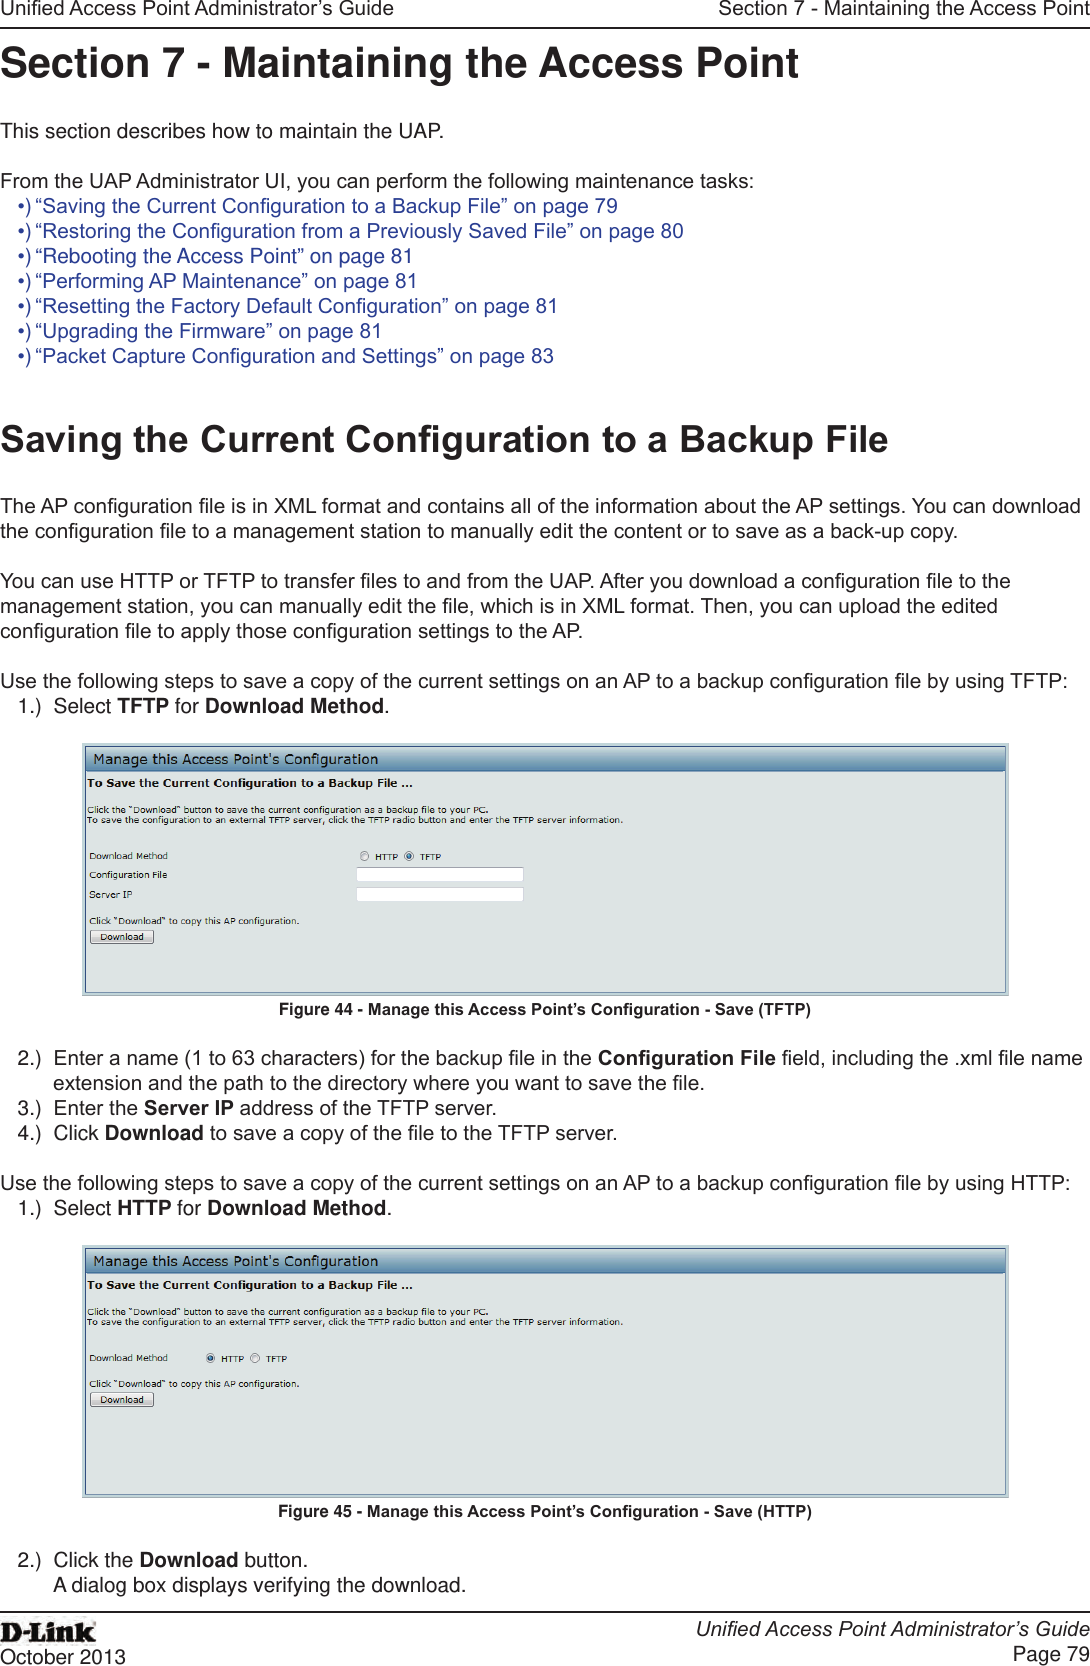 Unied Access Point Administrator’s GuideUnied Access Point Administrator’s GuidePage 79October 2013Section 7 - Maintaining the Access PointSection 7 - Maintaining the Access PointThis section describes how to maintain the UAP.From the UAP Administrator UI, you can perform the following maintenance tasks:•) “Saving the Current Conguration to a Backup File” on page 79•) “Restoring the Conguration from a Previously Saved File” on page 80•) “Rebooting the Access Point” on page 81•) “Performing AP Maintenance” on page 81•) “Resetting the Factory Default Conguration” on page 81•) “Upgrading the Firmware” on page 81•) “Packet Capture Conguration and Settings” on page 83Saving the Current Conguration to a Backup FileThe AP conguration le is in XML format and contains all of the information about the AP settings. You can download the conguration le to a management station to manually edit the content or to save as a back-up copy. You can use HTTP or TFTP to transfer les to and from the UAP. After you download a conguration le to the management station, you can manually edit the le, which is in XML format. Then, you can upload the edited conguration le to apply those conguration settings to the AP.Use the following steps to save a copy of the current settings on an AP to a backup conguration le by using TFTP:1.)  Select TFTP for Download Method.Figure 44 - Manage this Access Point’s Conguration - Save (TFTP)2.)  Enter a name (1 to 63 characters) for the backup le in the Conguration File eld, including the .xml le name extension and the path to the directory where you want to save the le.3.)  Enter the Server IP address of the TFTP server.4.)  Click Download to save a copy of the le to the TFTP server.Use the following steps to save a copy of the current settings on an AP to a backup conguration le by using HTTP:1.)  Select HTTP for Download Method.Figure 45 - Manage this Access Point’s Conguration - Save (HTTP)2.)  Click the Download button.A dialog box displays verifying the download.